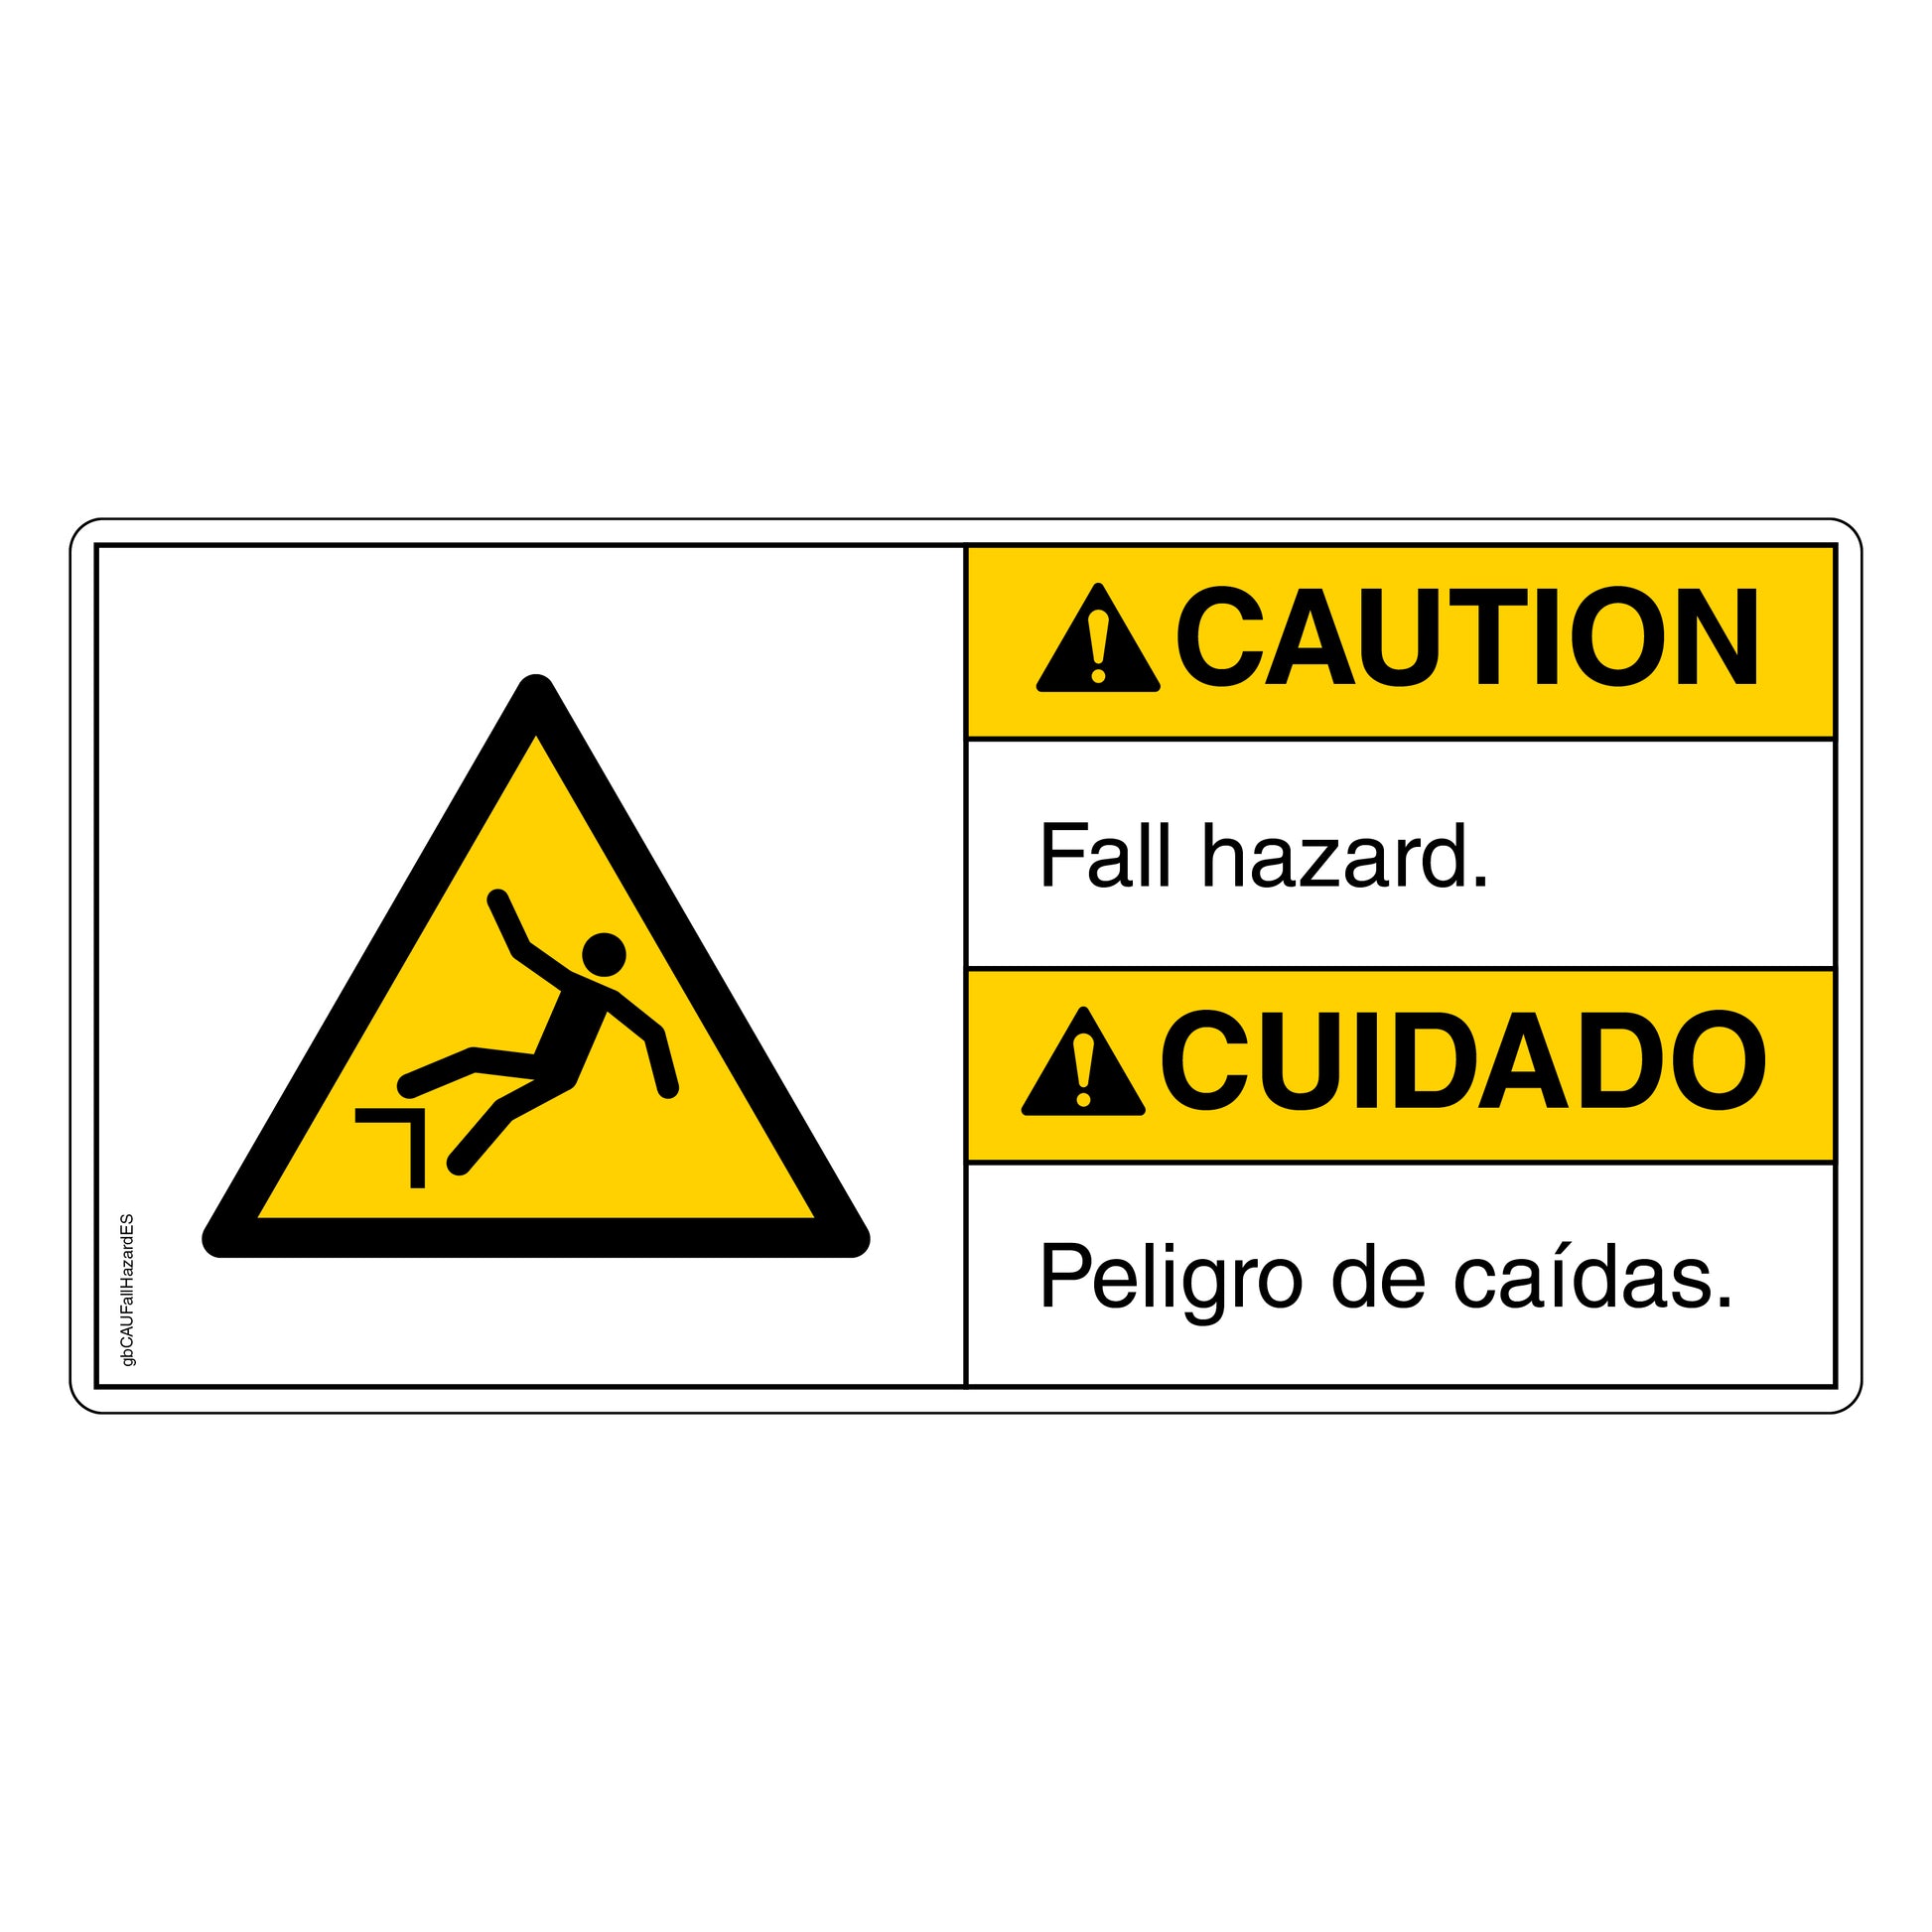 Caution Fall Hazard Decal in English and Spanish.